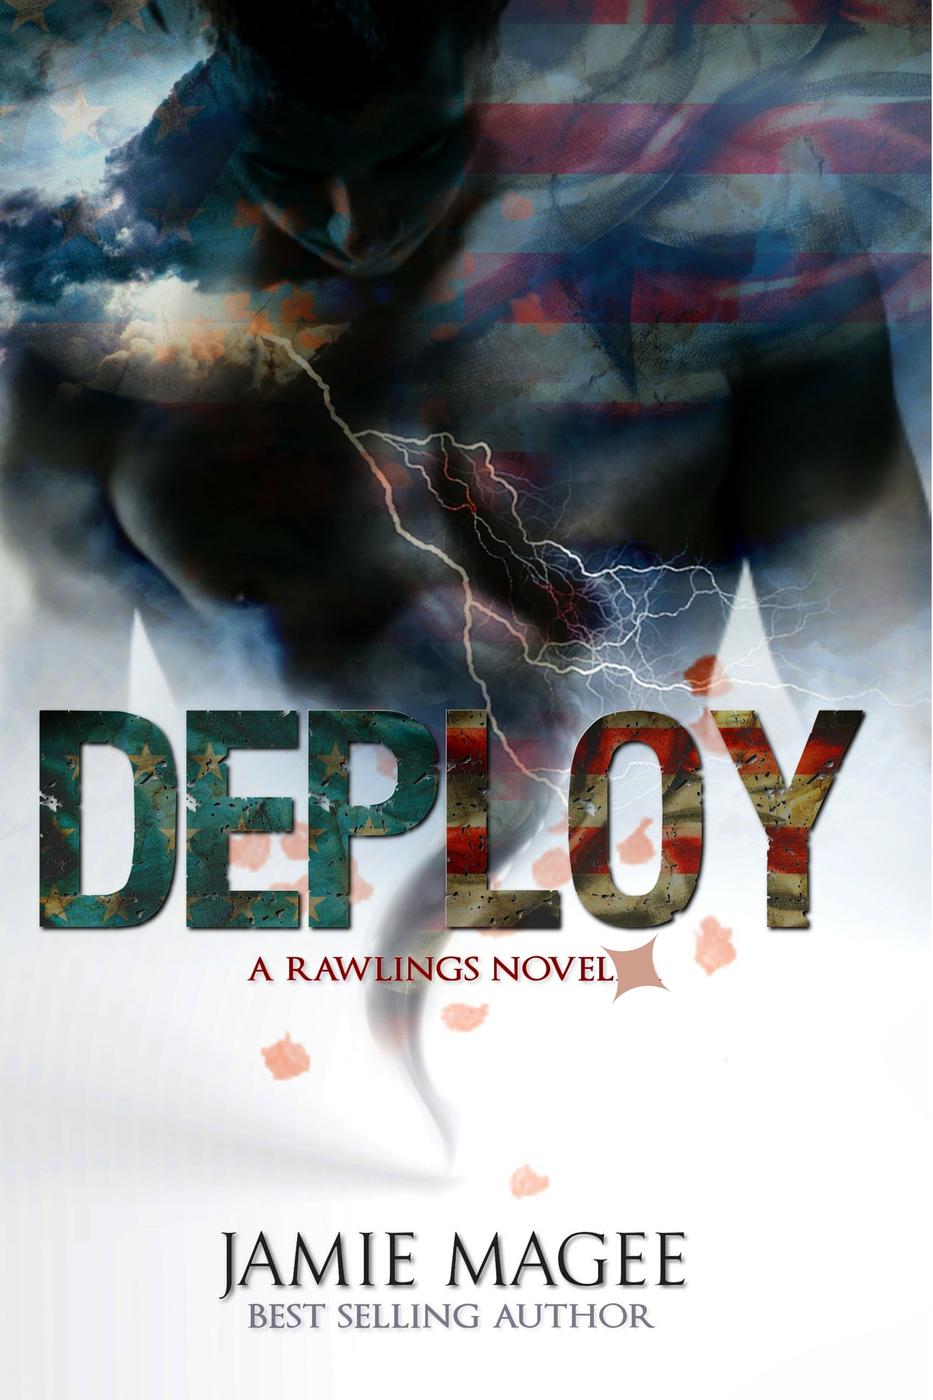 Deploy (2016) by Jamie Magee